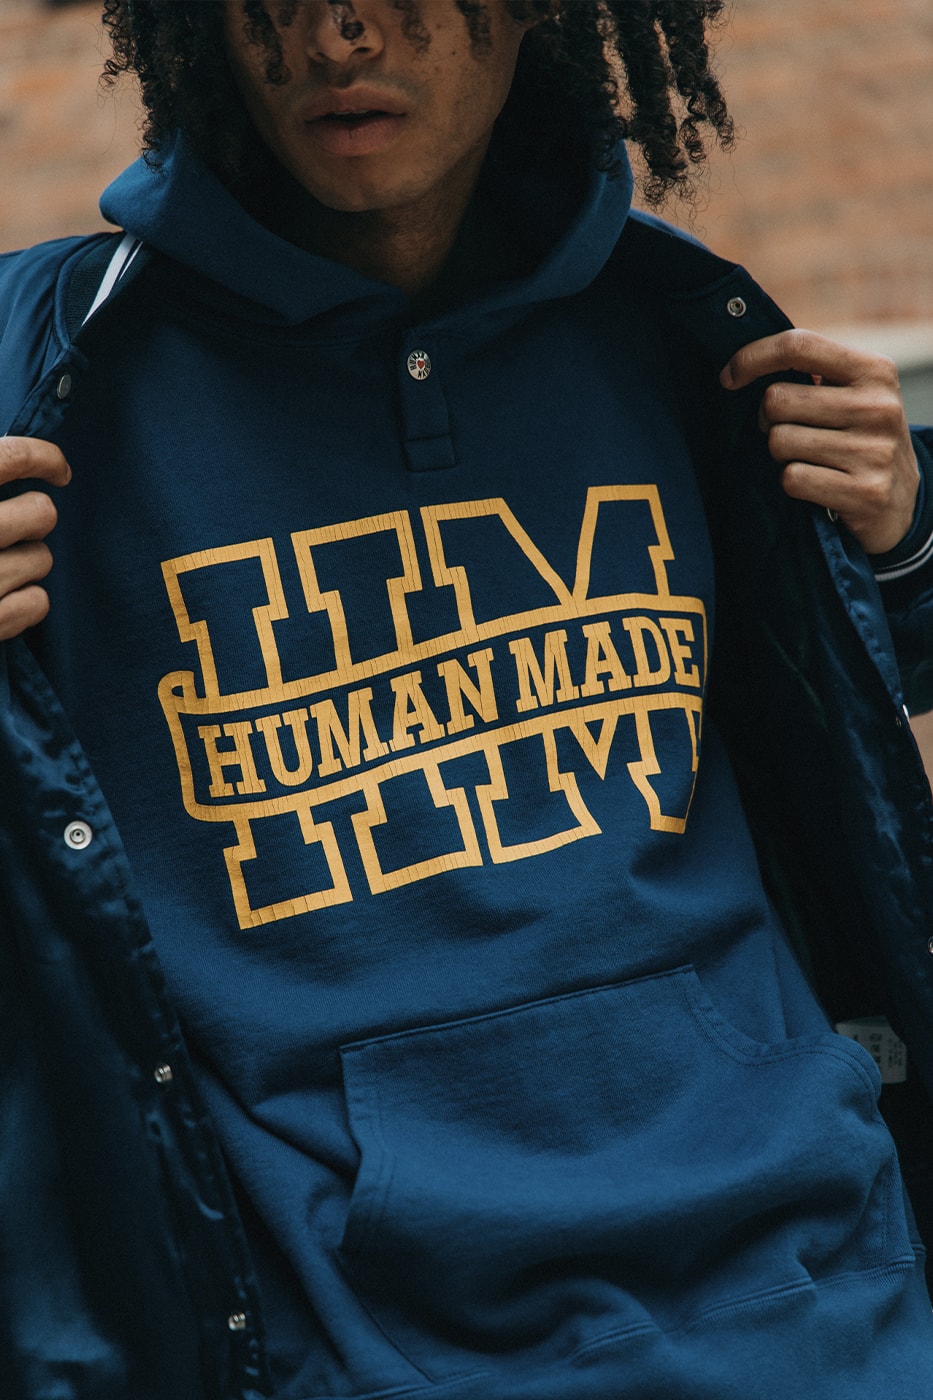 Human Made - BOMBER JACKET  HBX - Globally Curated Fashion and Lifestyle  by Hypebeast